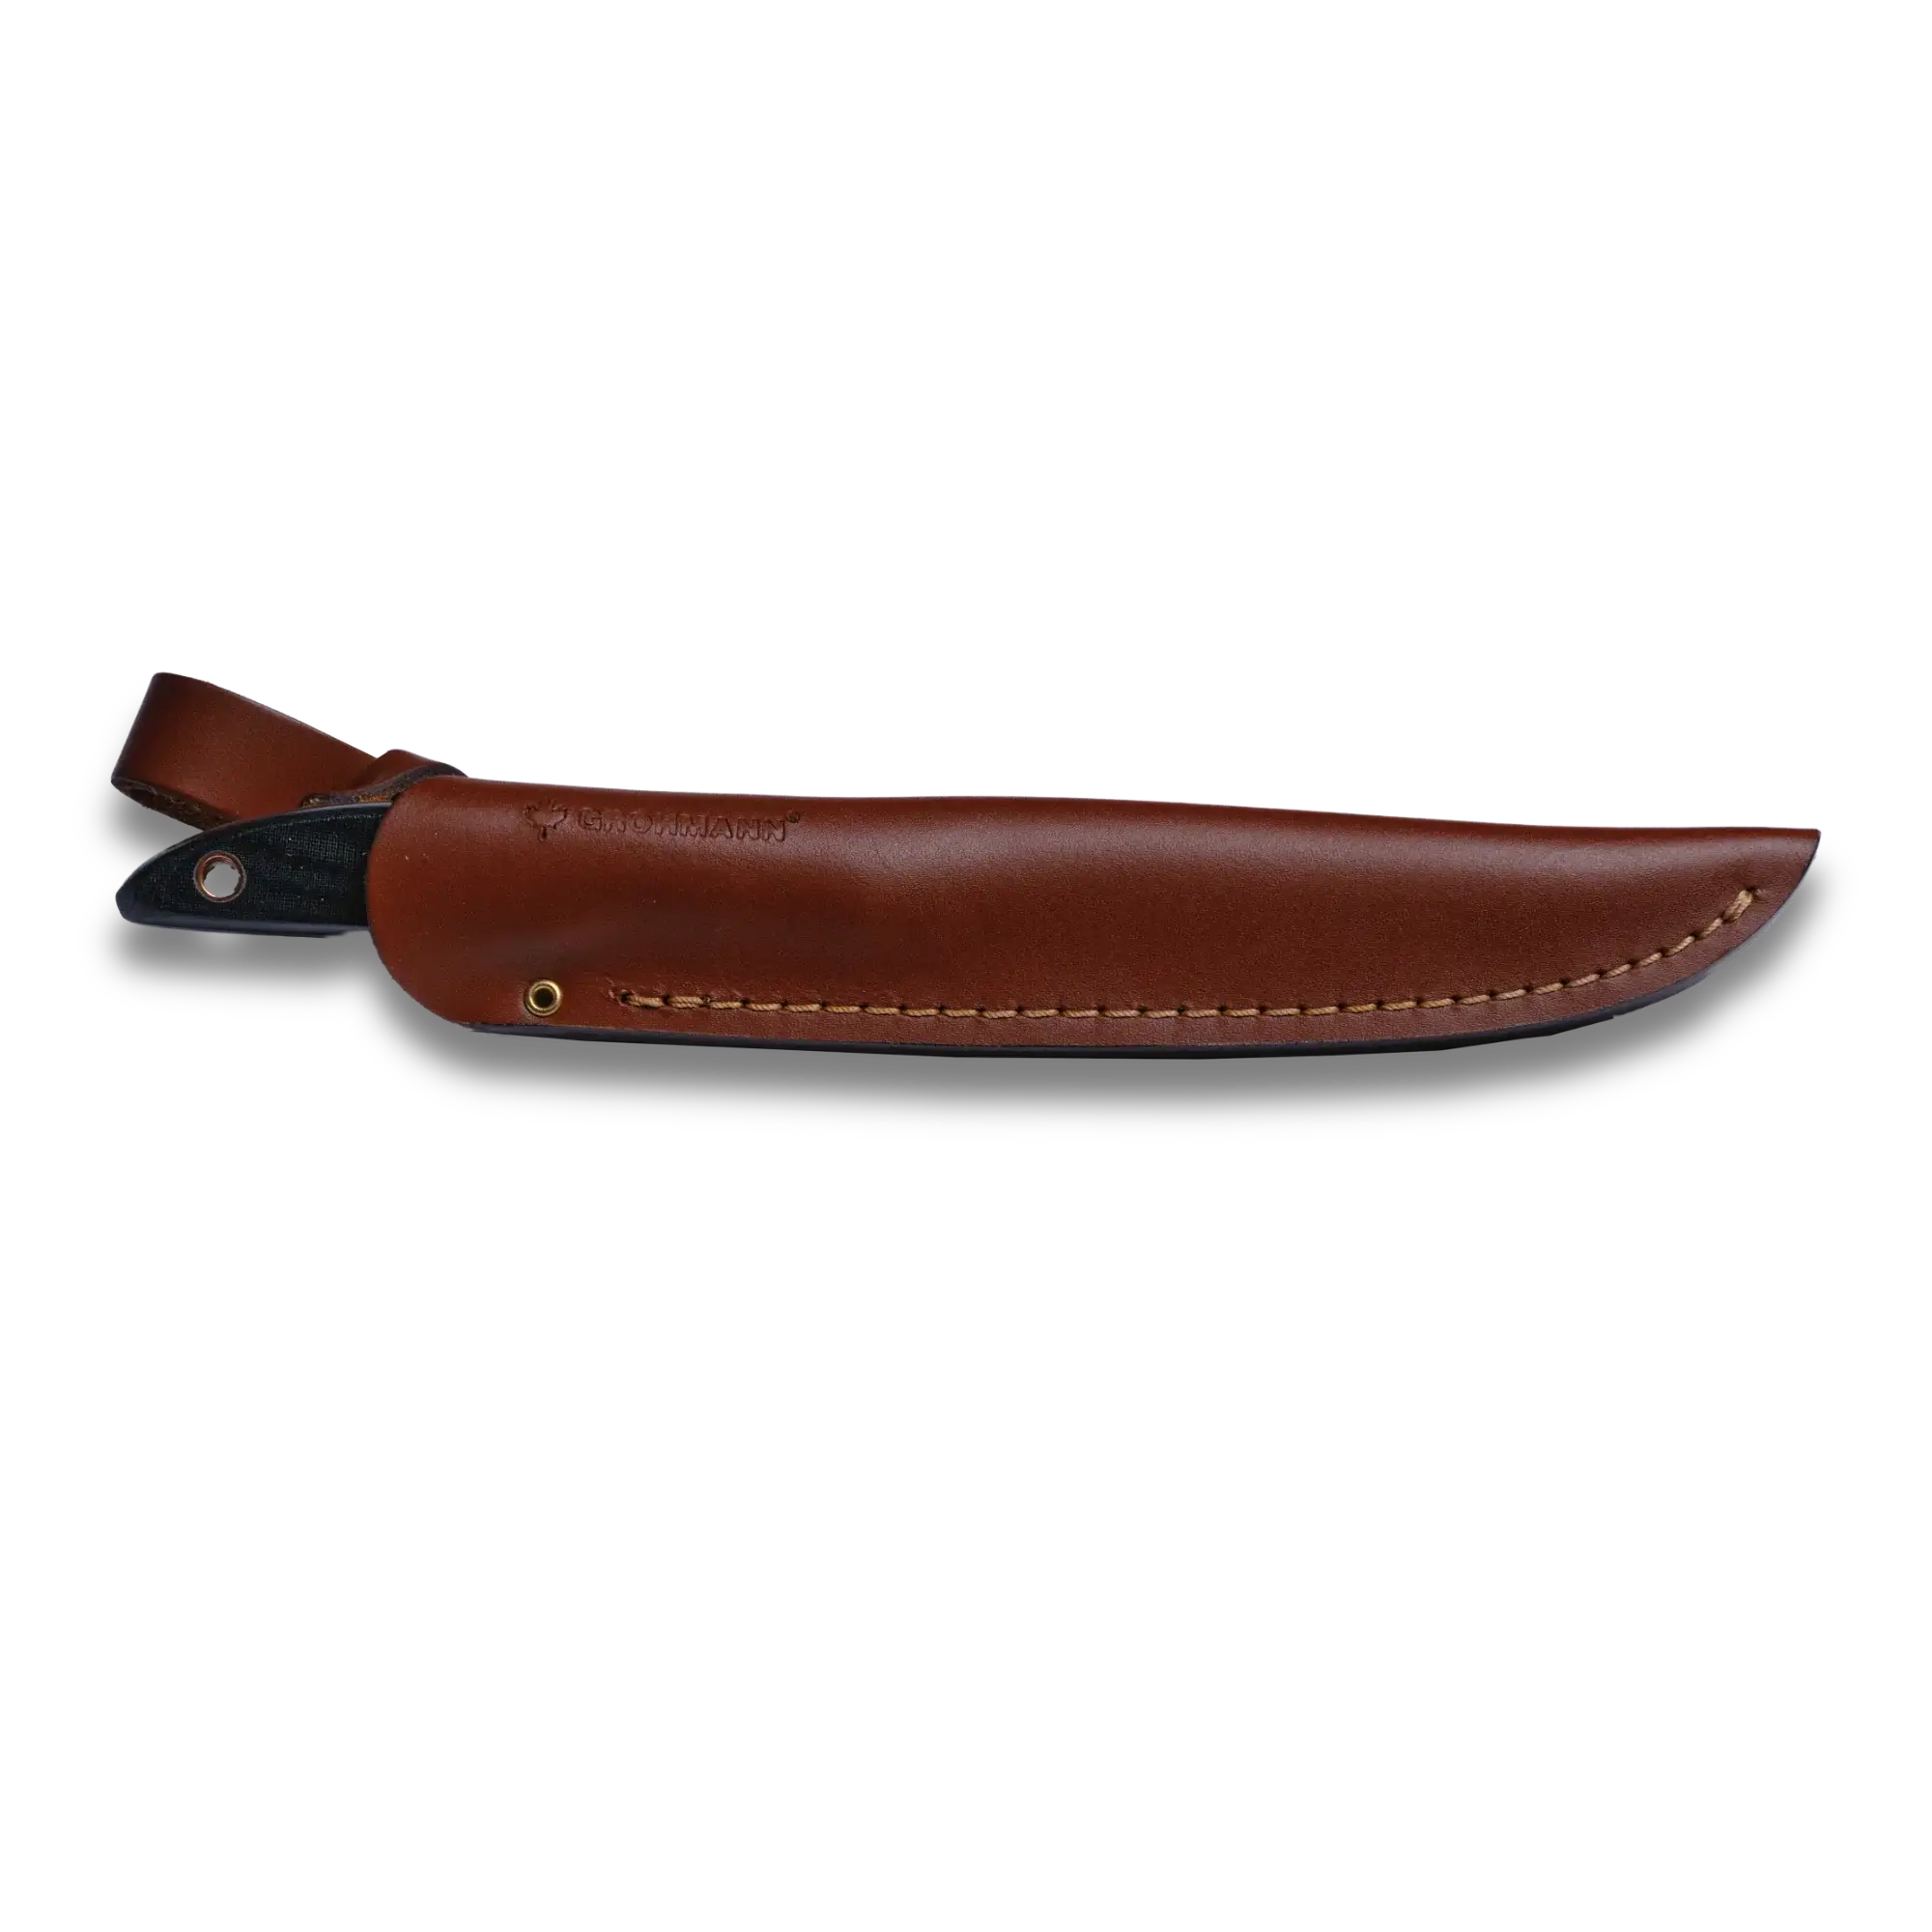 Trout and Bird Knife Carbon Steel Blade - Black Micarta handle  | M2C